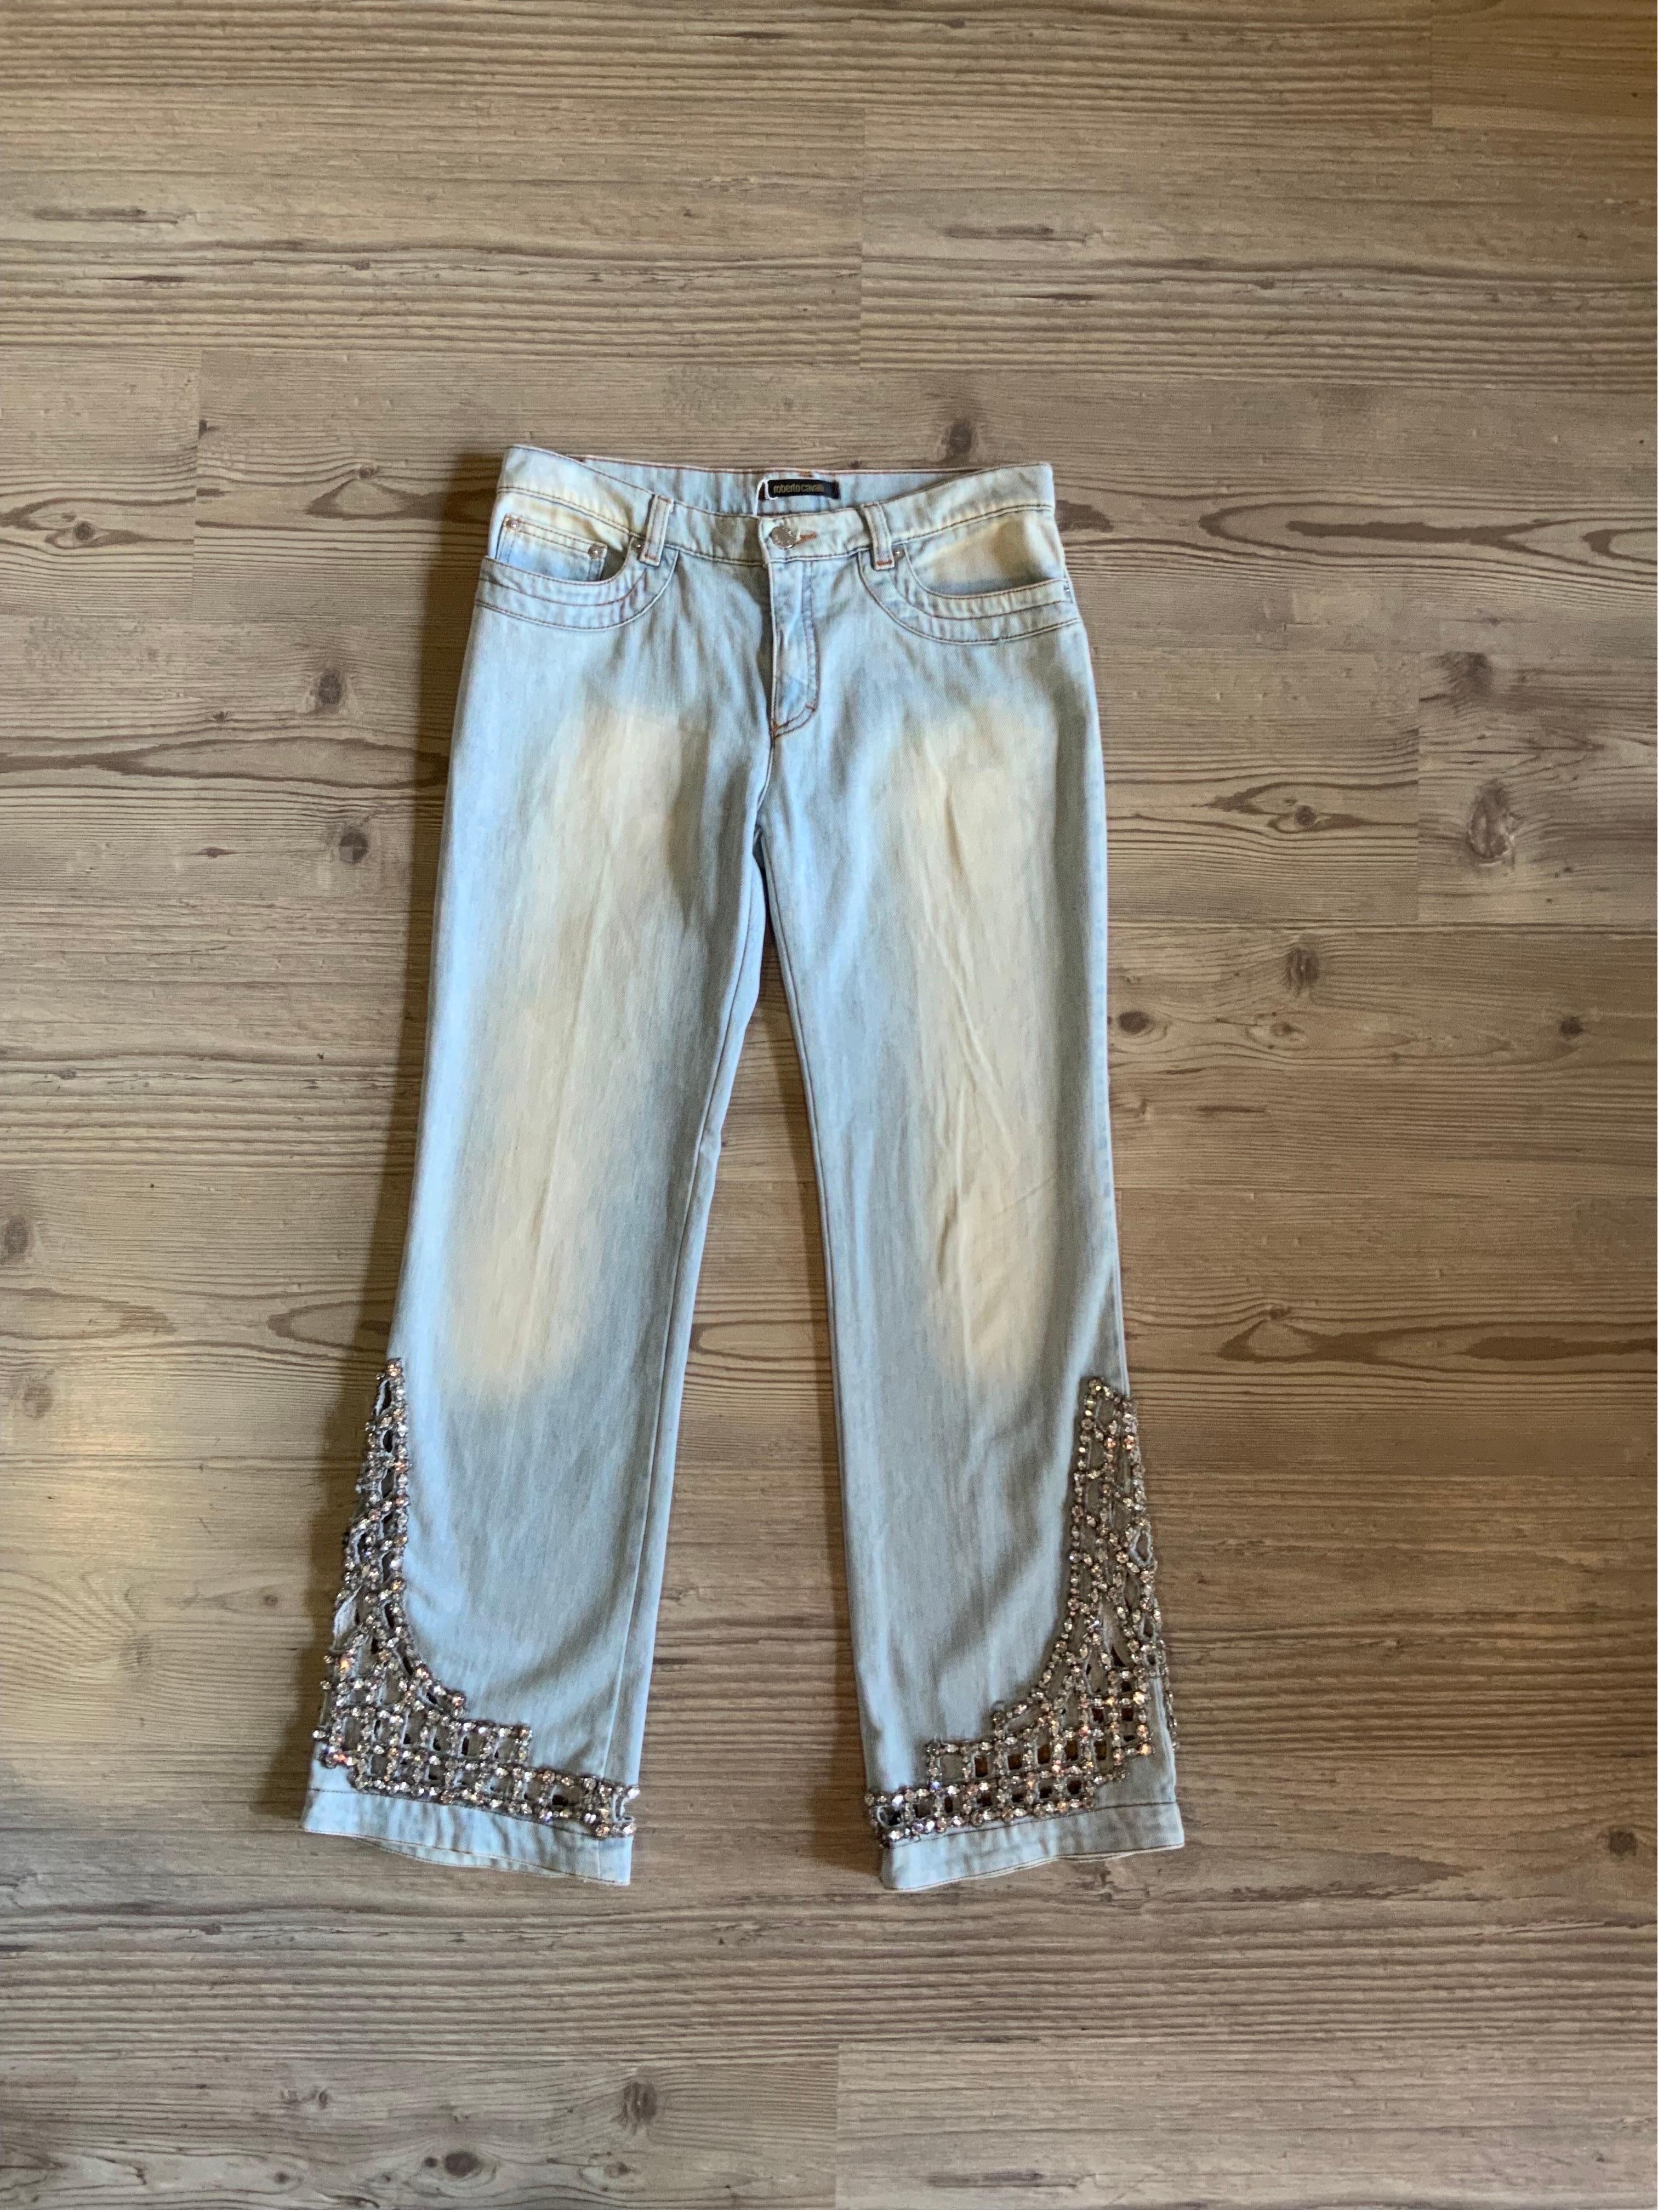 ROBERTO CAVALLI JEWEL JEANS.
Cotton and lycra denim.
Jewel detail along the trousers.
Size S
Waist 40cm
Length 96 cm
Very good general condition, shows signs of normal use.